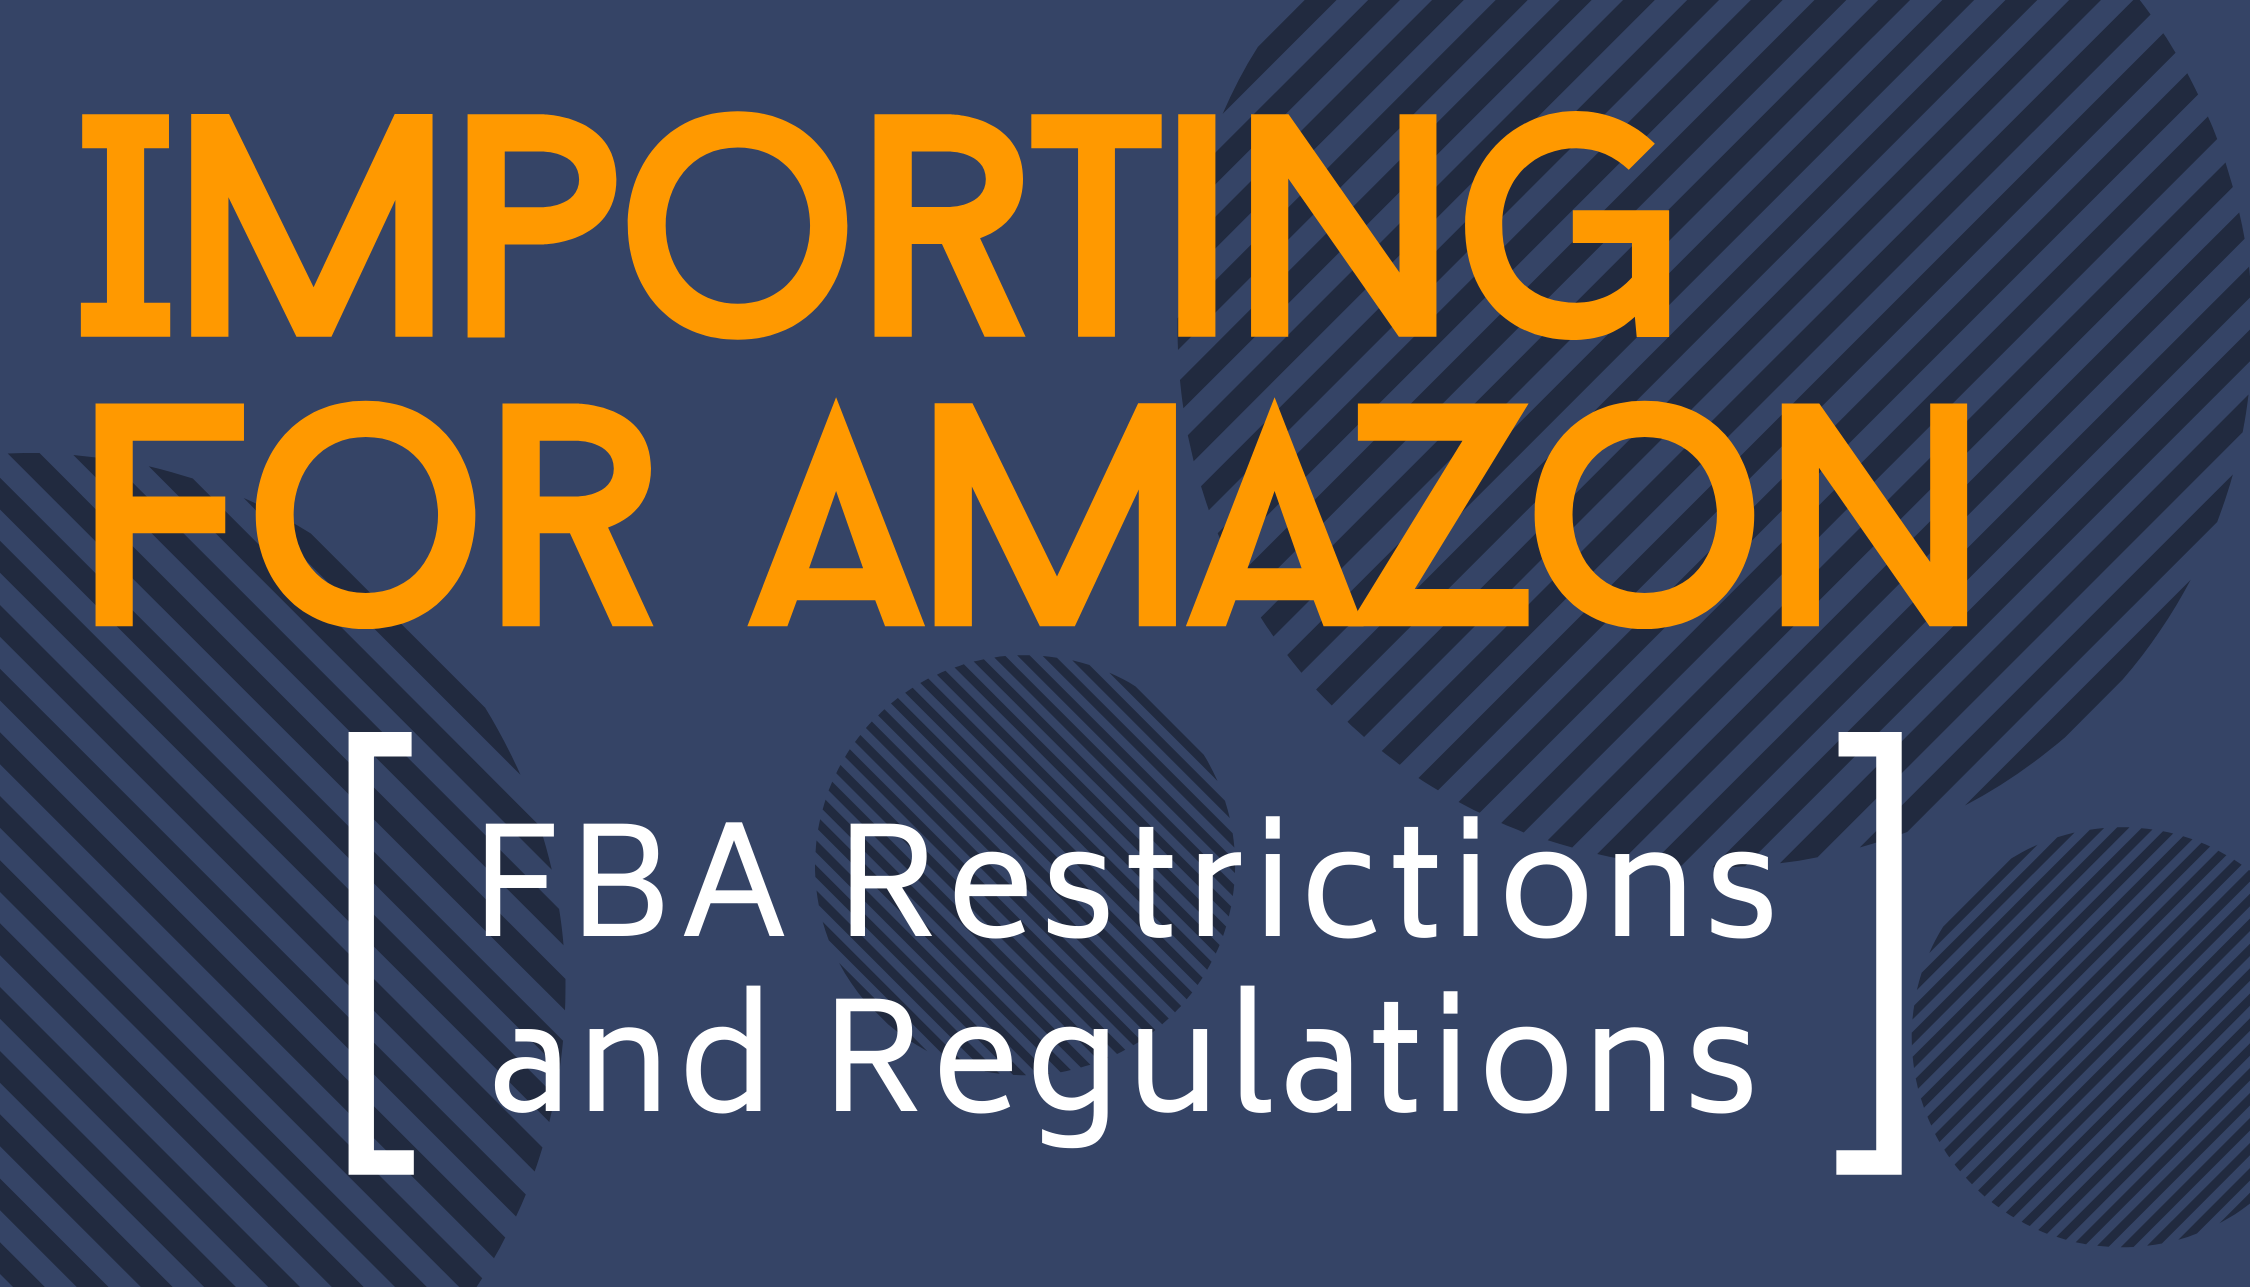 Importing for Amazon: FBA Restrictions and Regulations